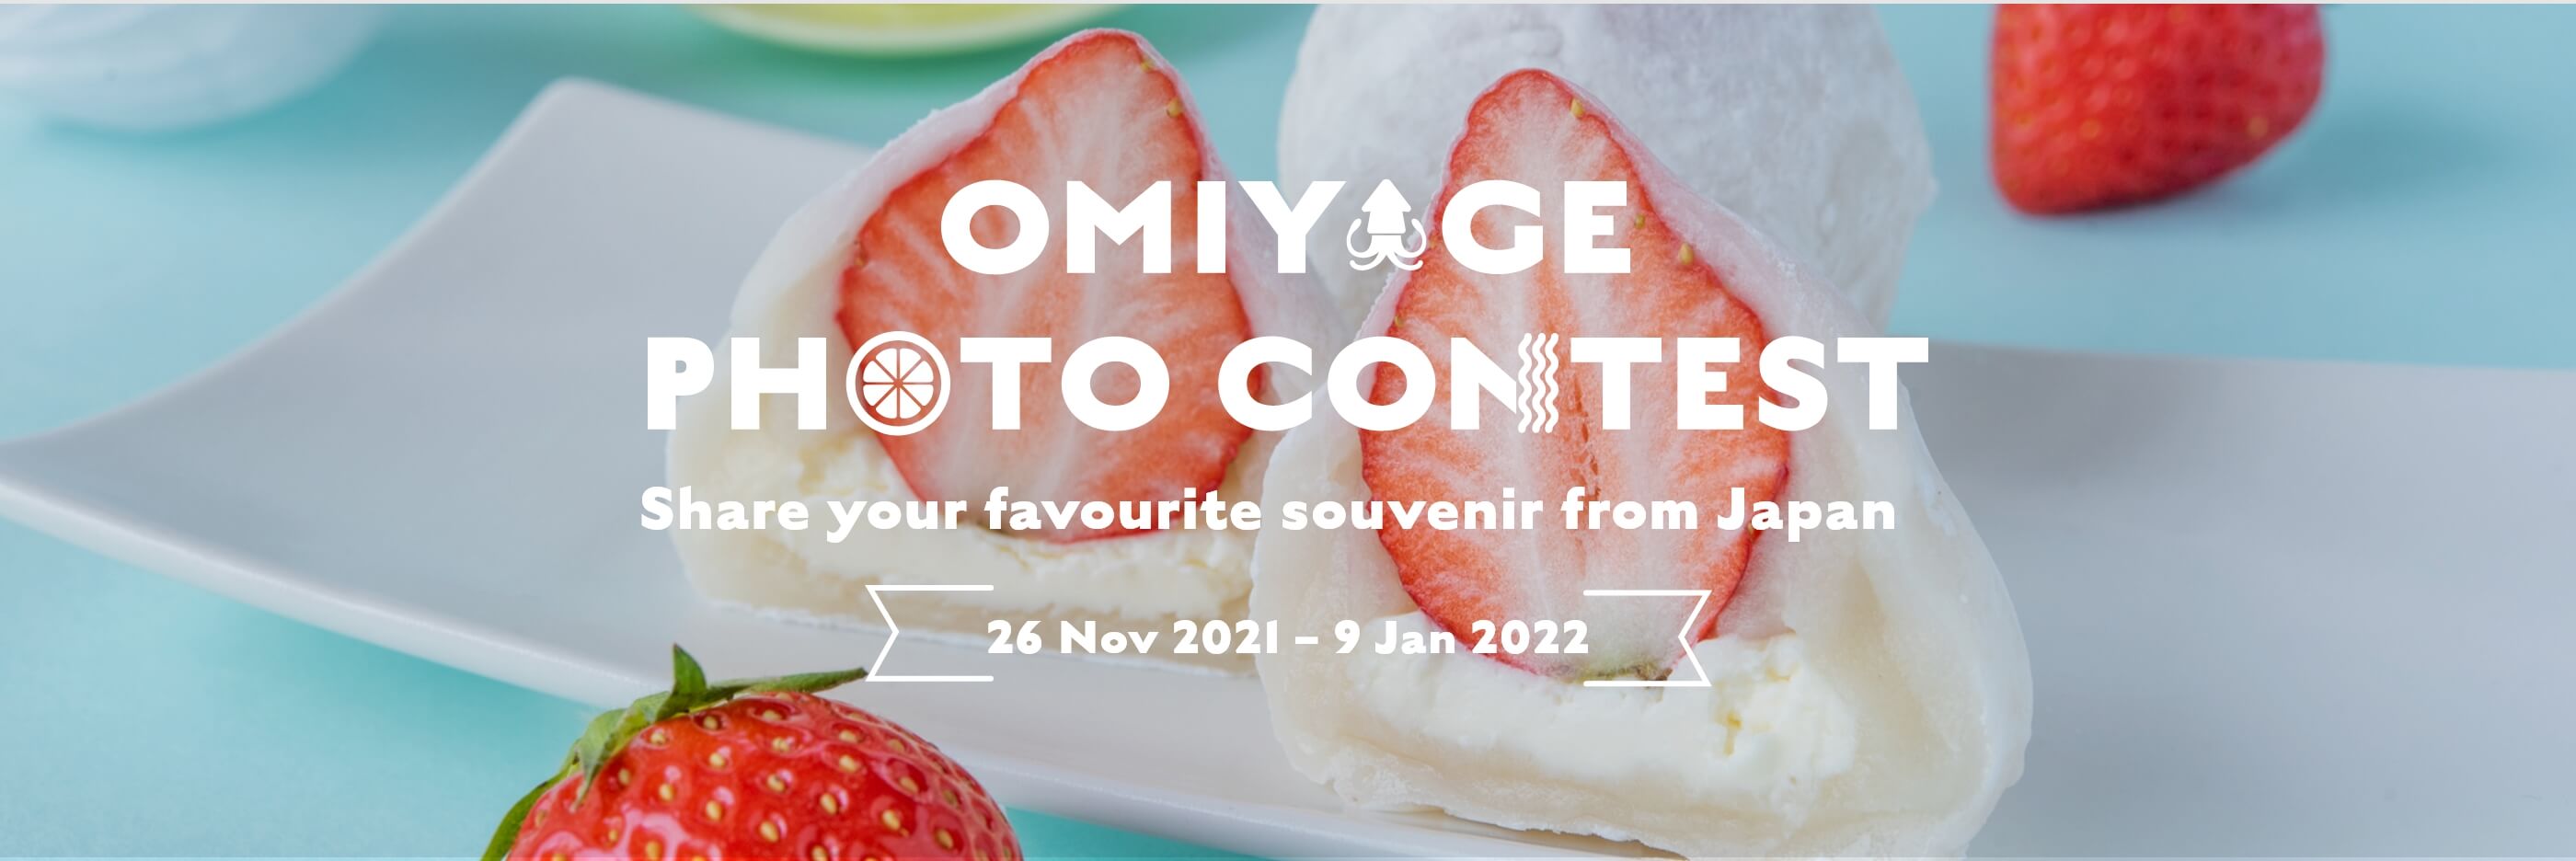 Omiyage Photo Contest Share your favourite souvenir from Japan 26 Nov, 2021 – 9 Jan, 2022